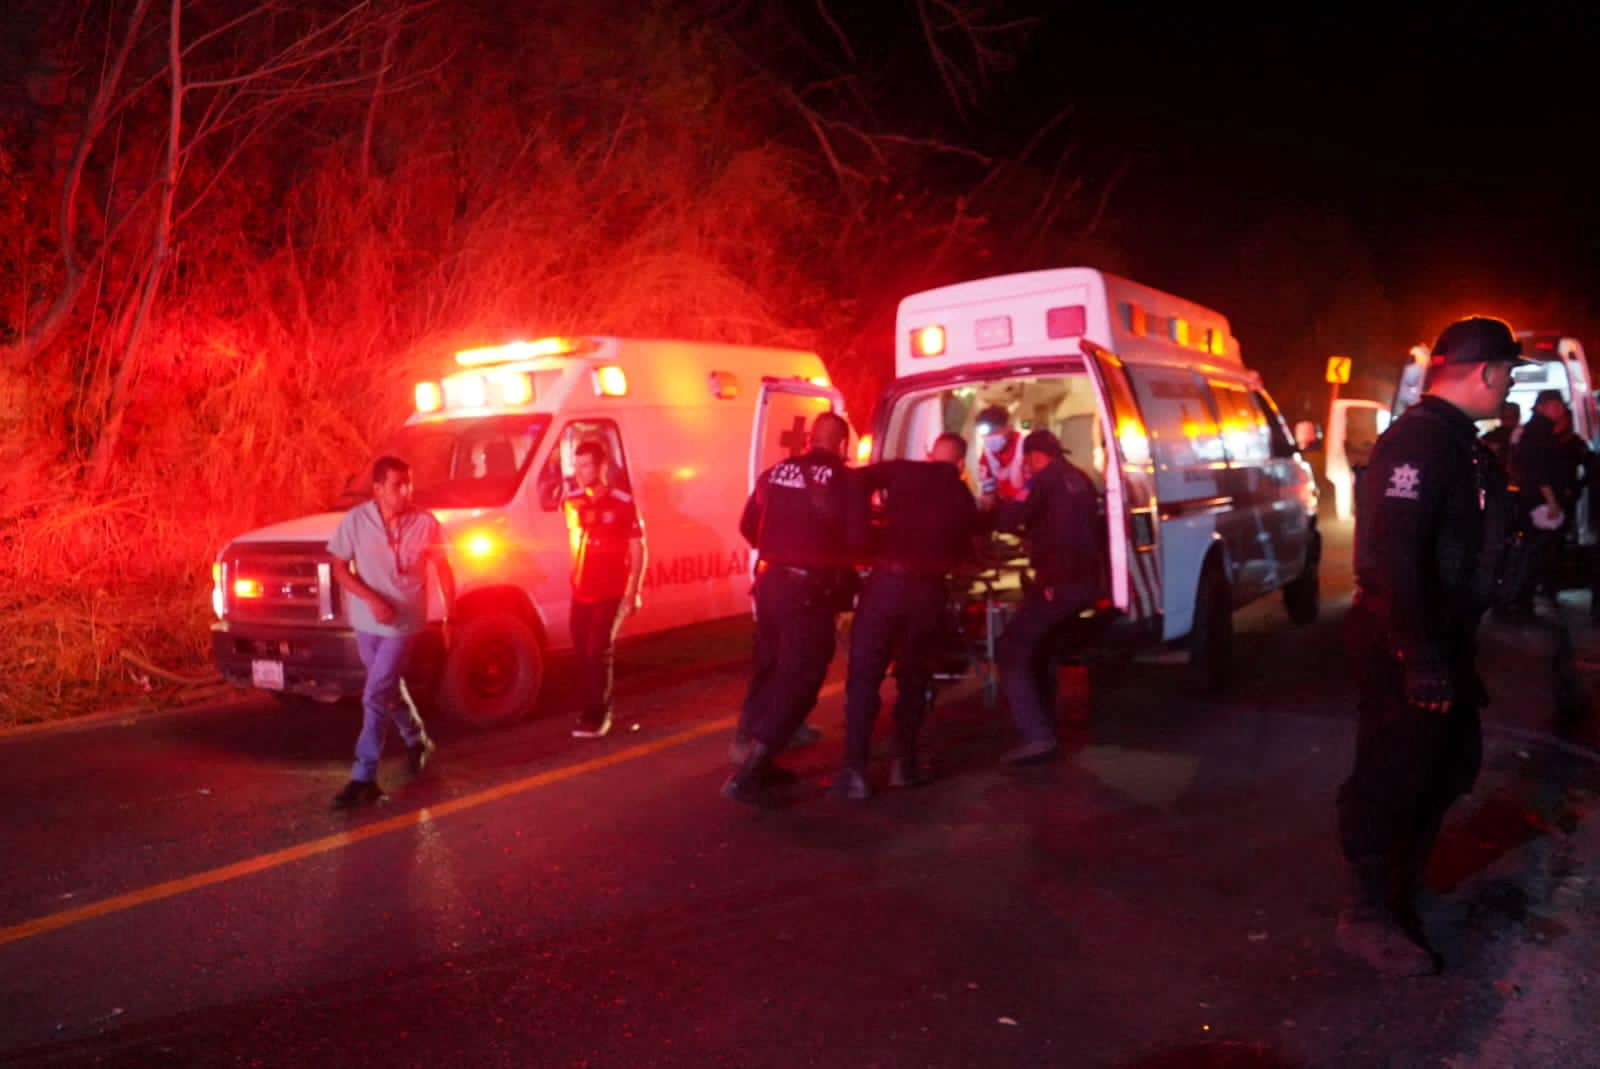 Bus accident where tourists traveling to Guayabitos were injured, in Compostela, Nayarit state